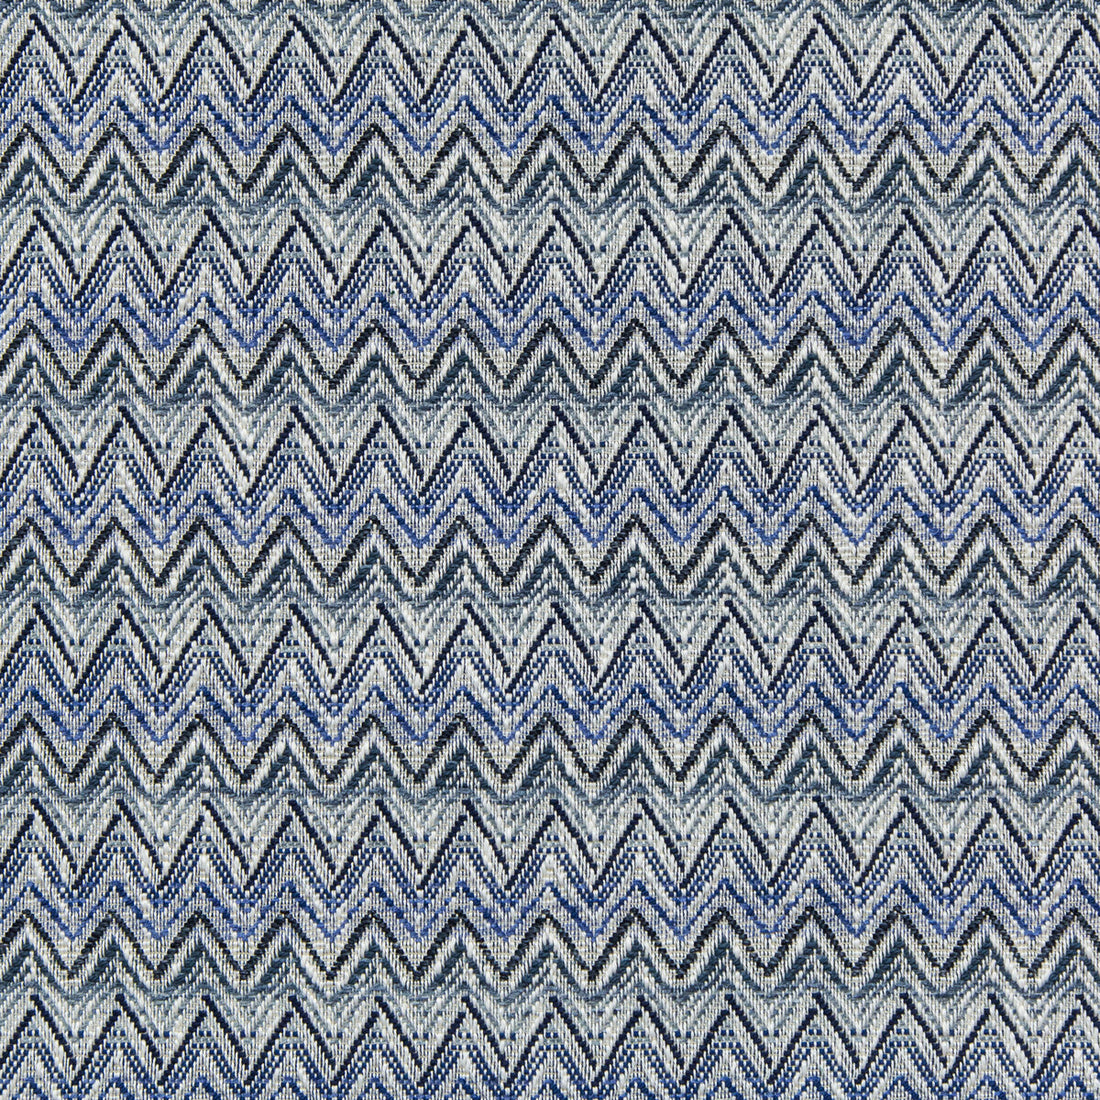 Cambrose Weave fabric in denim color - pattern 2014193.505.0 - by Lee Jofa in the Linford Weaves collection